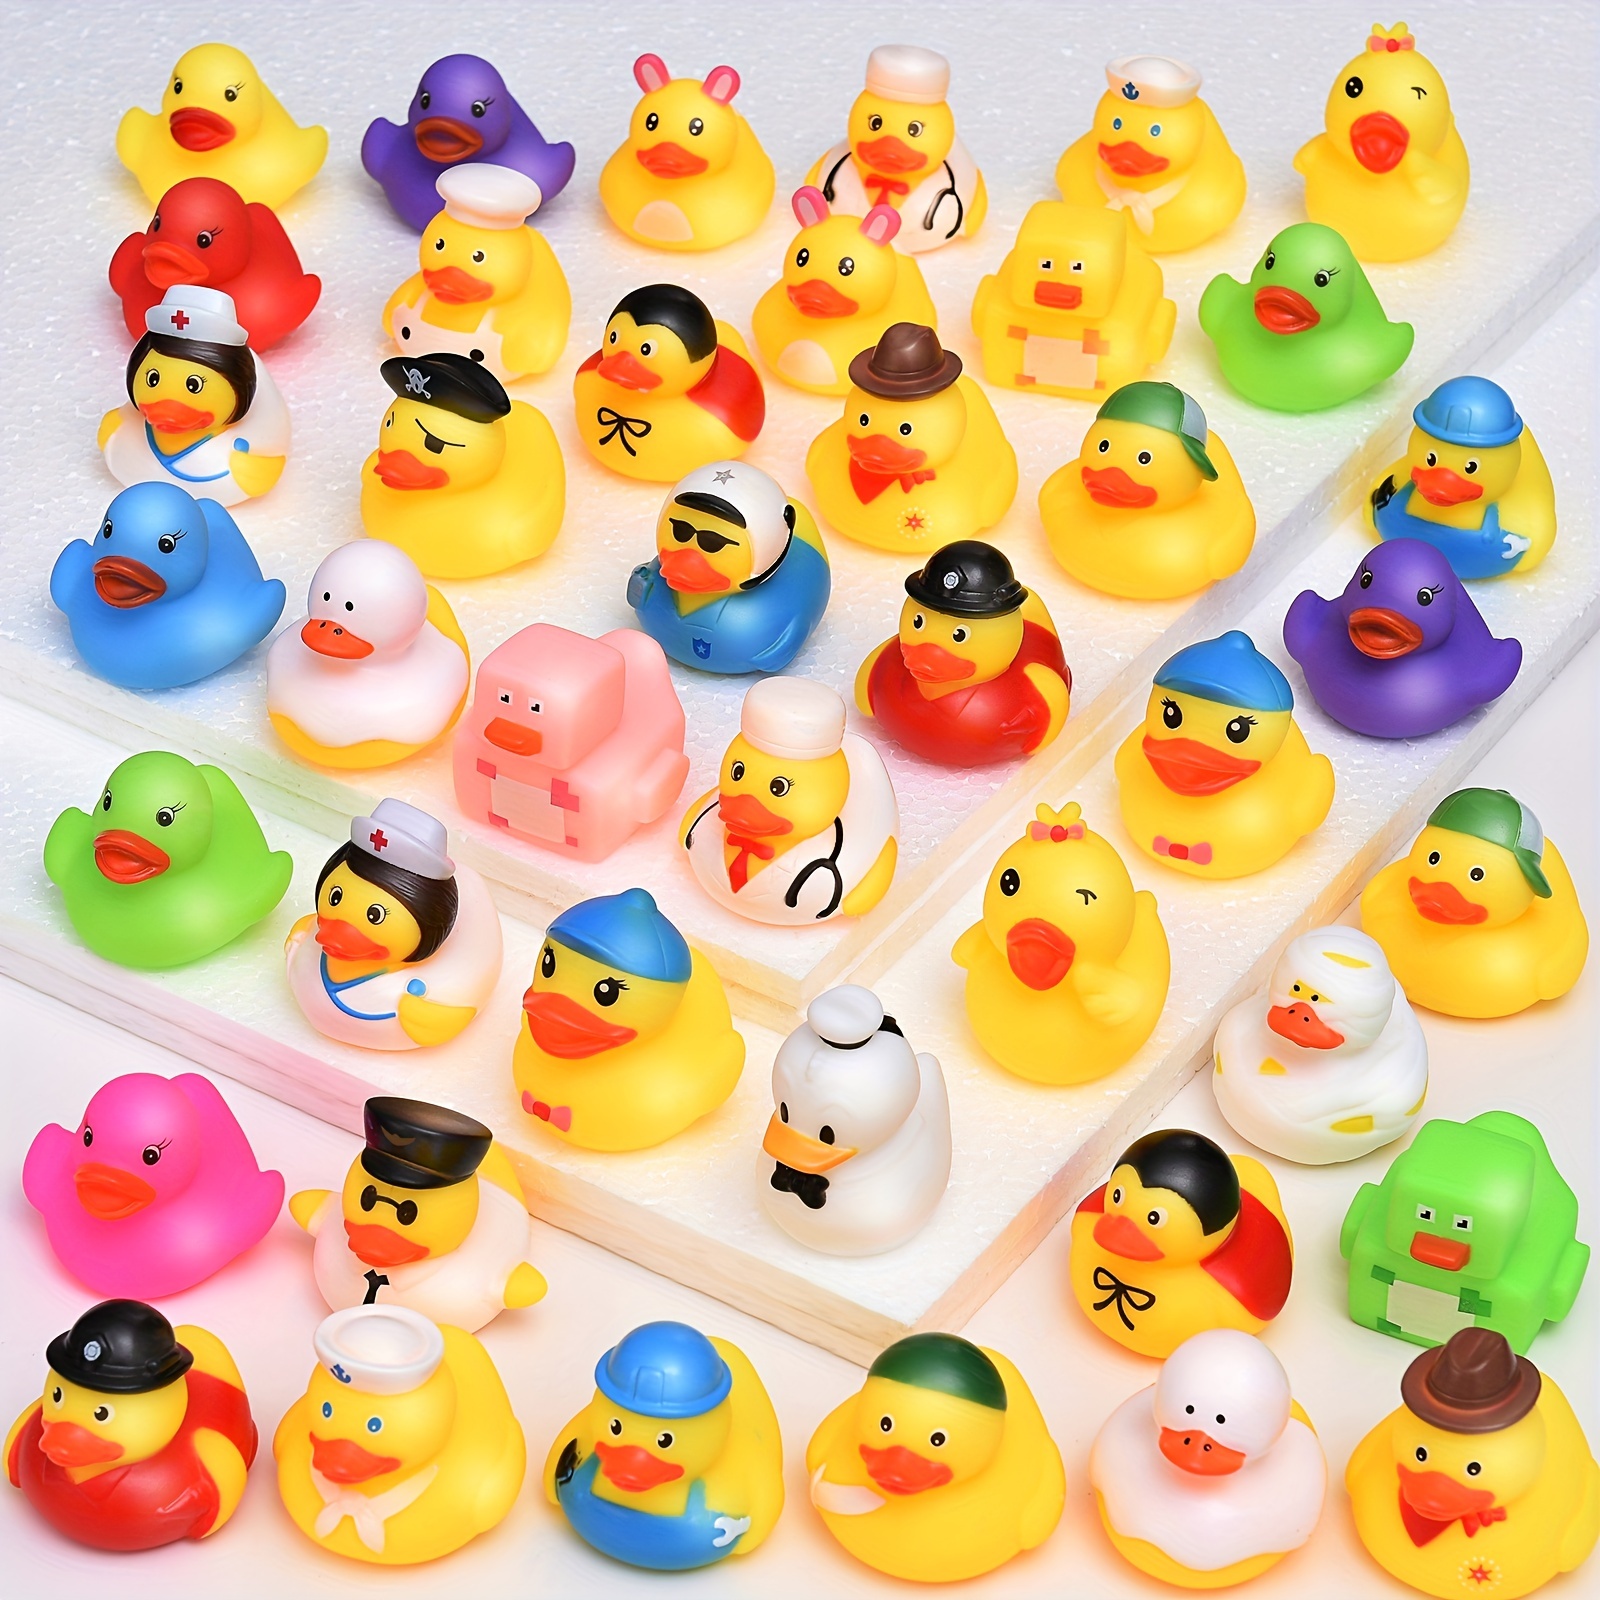 5pcs/set Kids Bath Toys Rubber Duck Fishing Net Swimming Rings Pool Toy  Shower Water Play Fun Games Toddler Toys Children Gifts - Realistic Reborn  Dolls for Sale